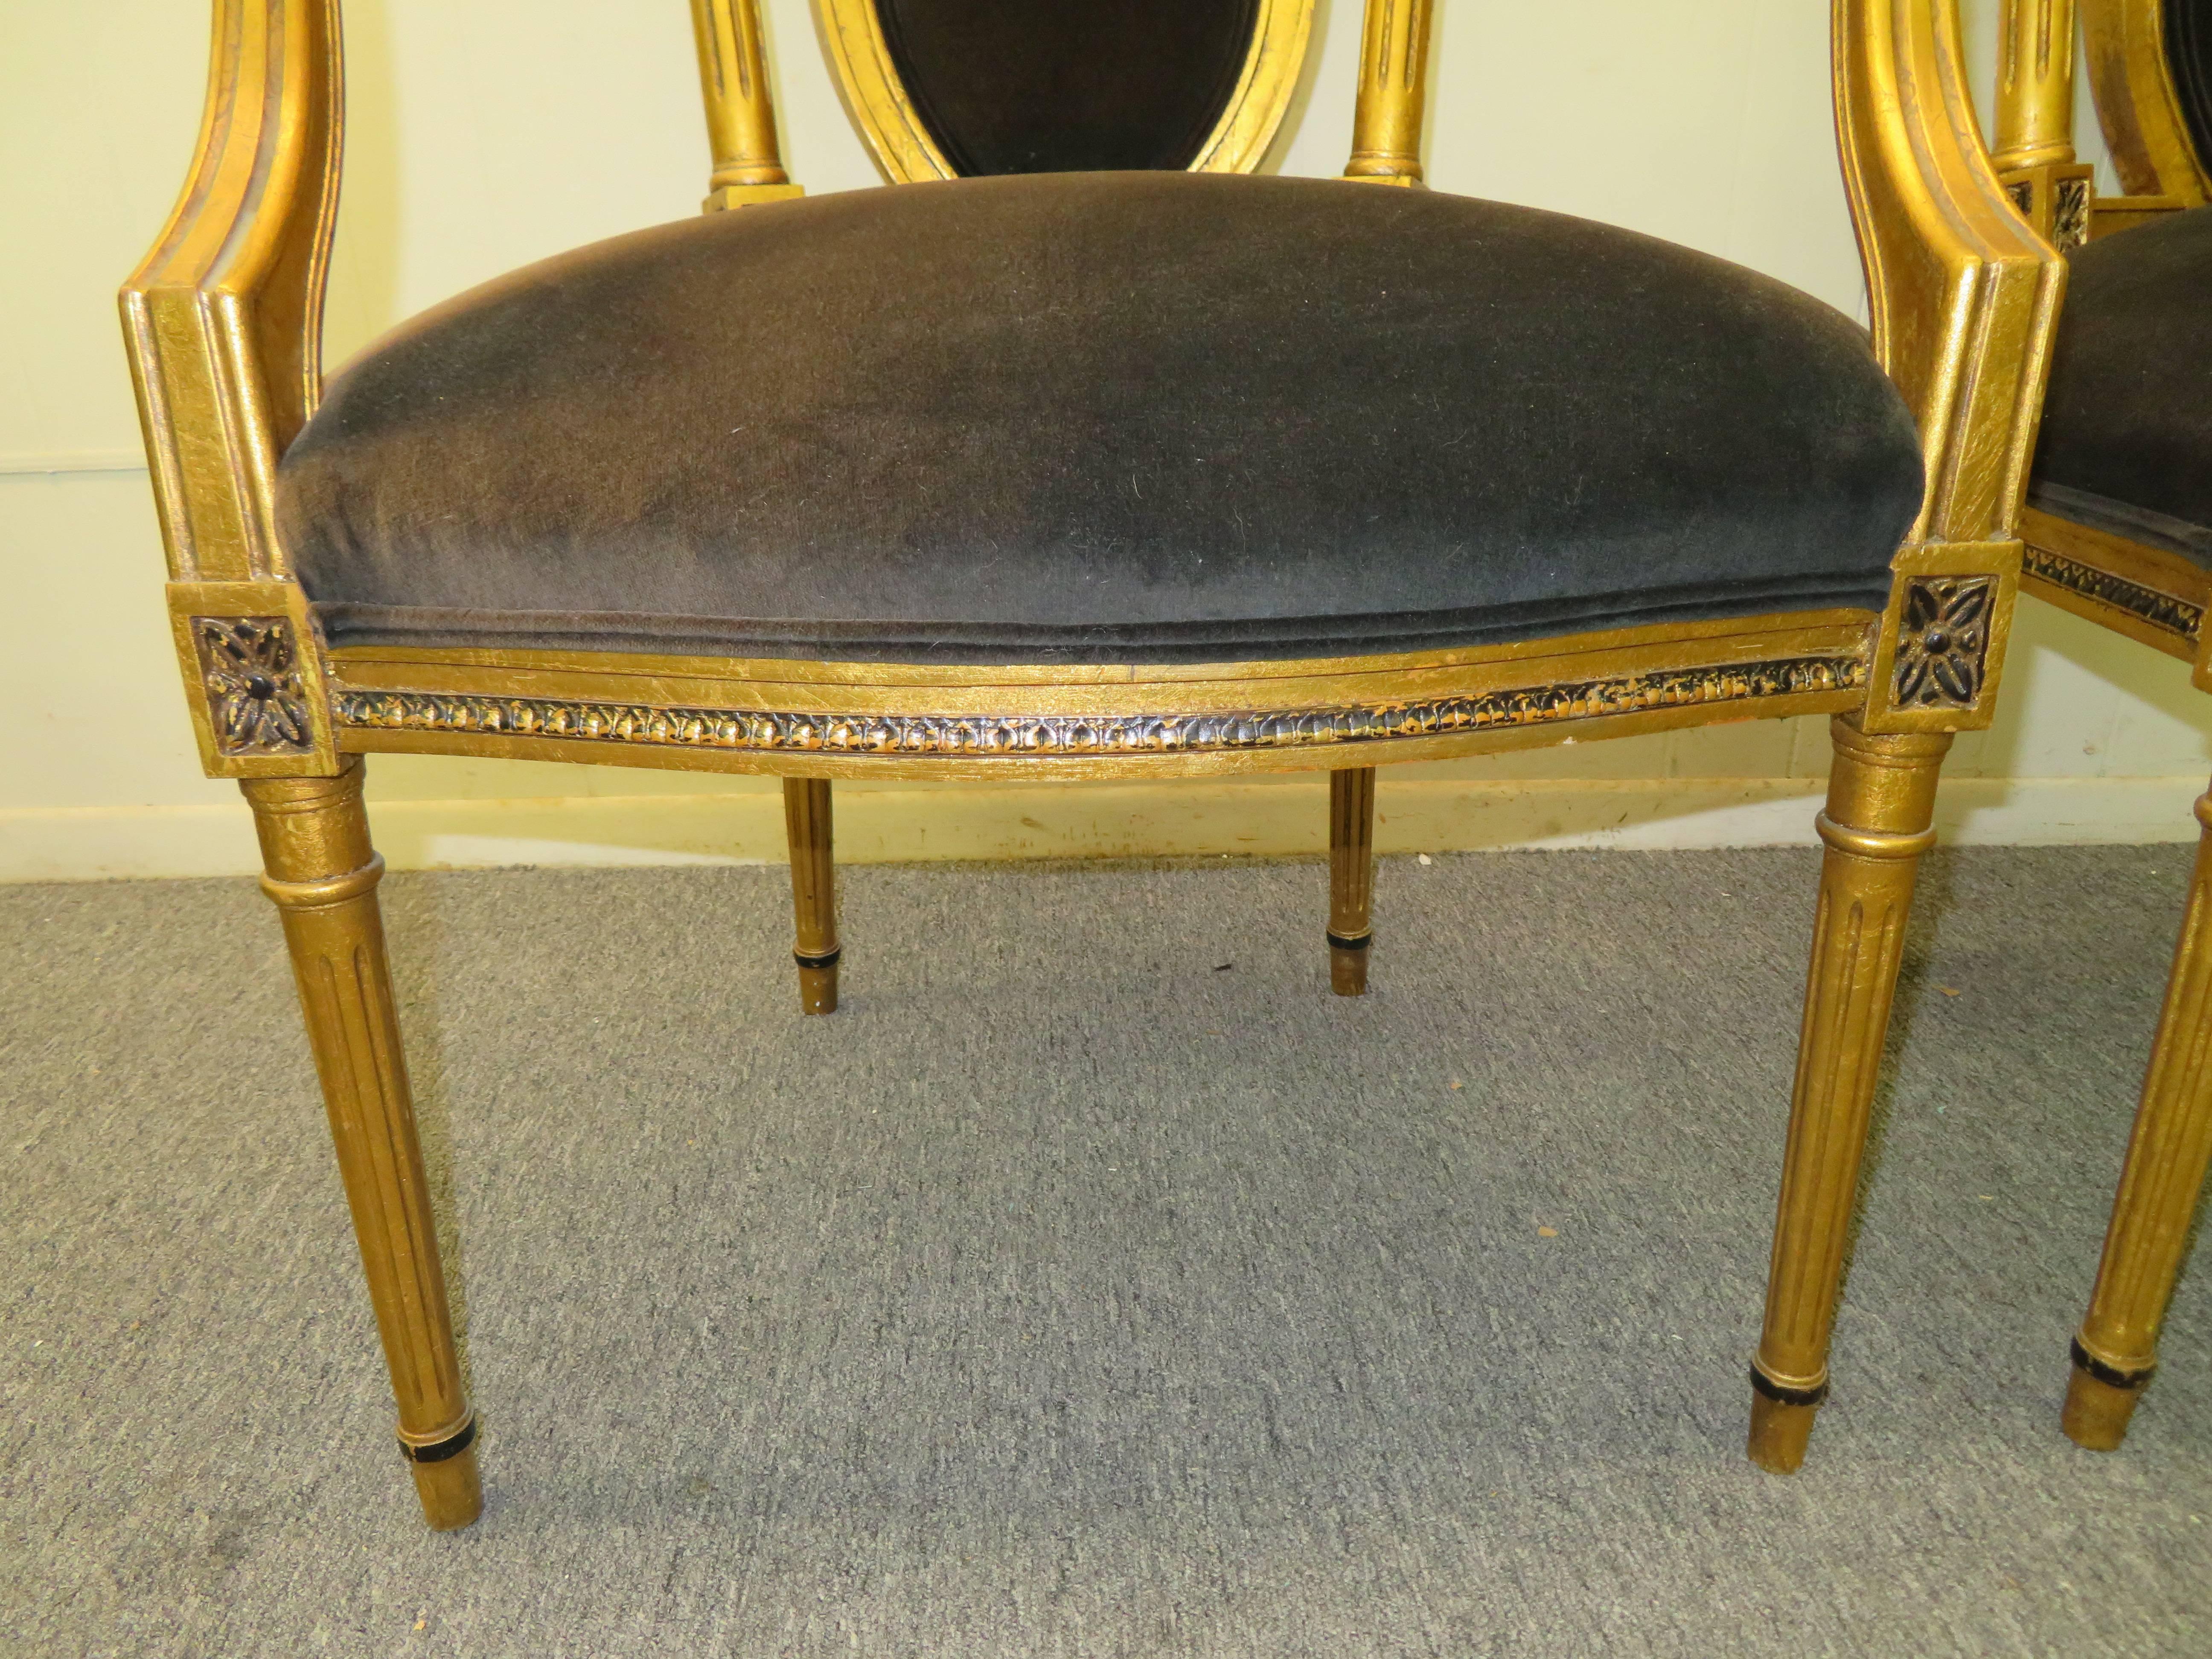 Pair of Hollywood Regency Maison Jansen Style Neoclassical Gilded Gold Armchairs 1